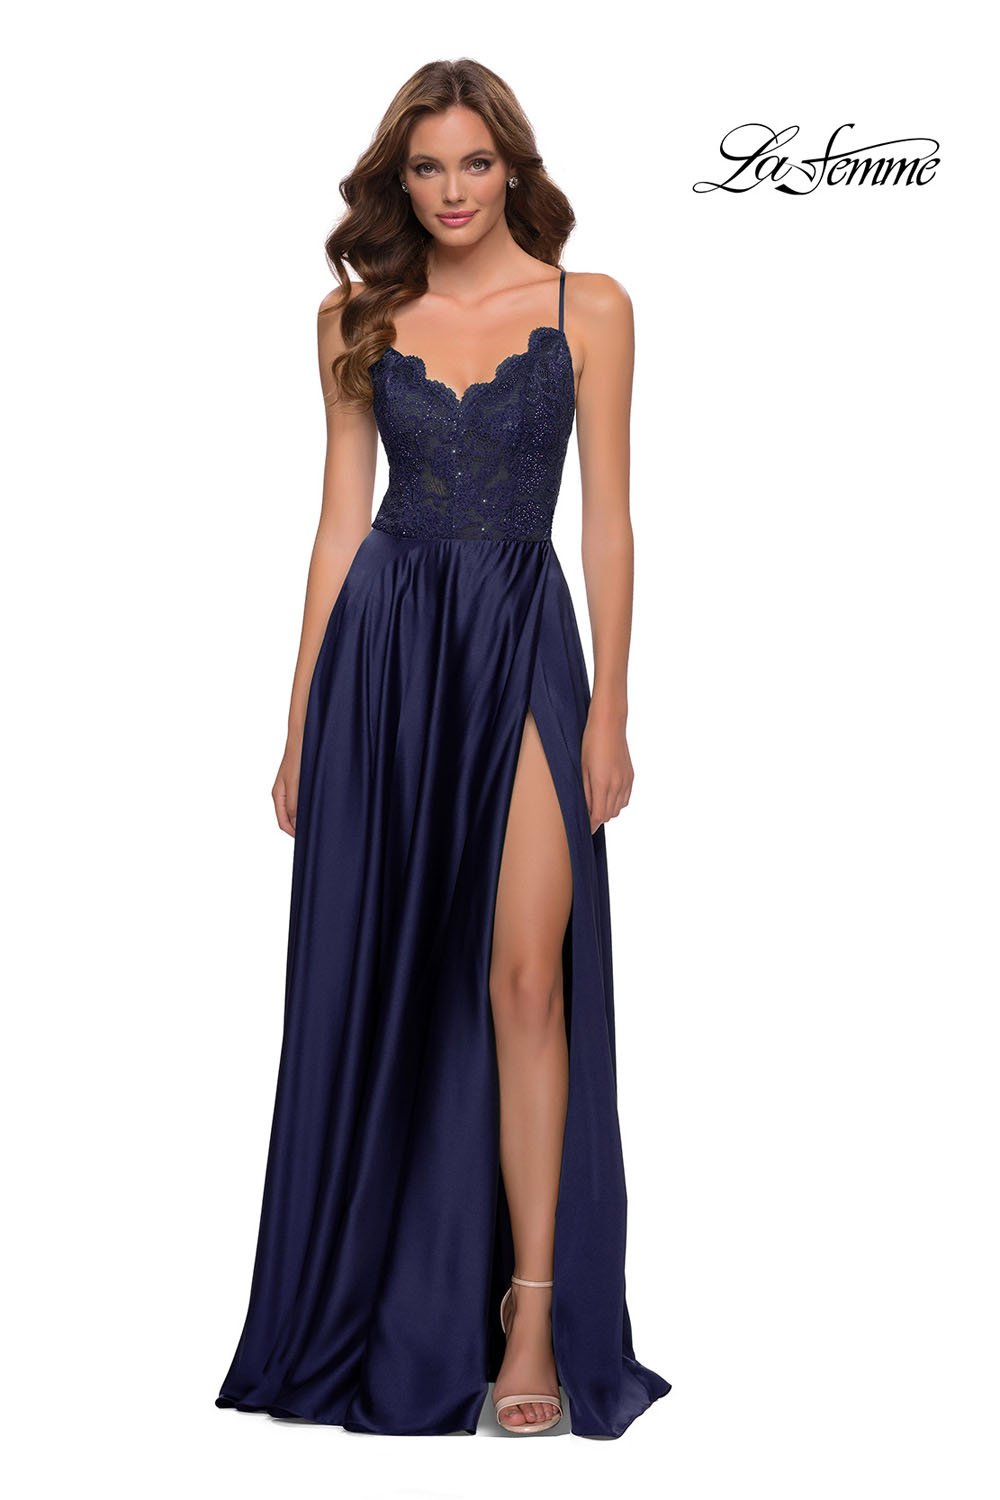 La Femme 29760 dress images in these colors: Emerald, Navy.